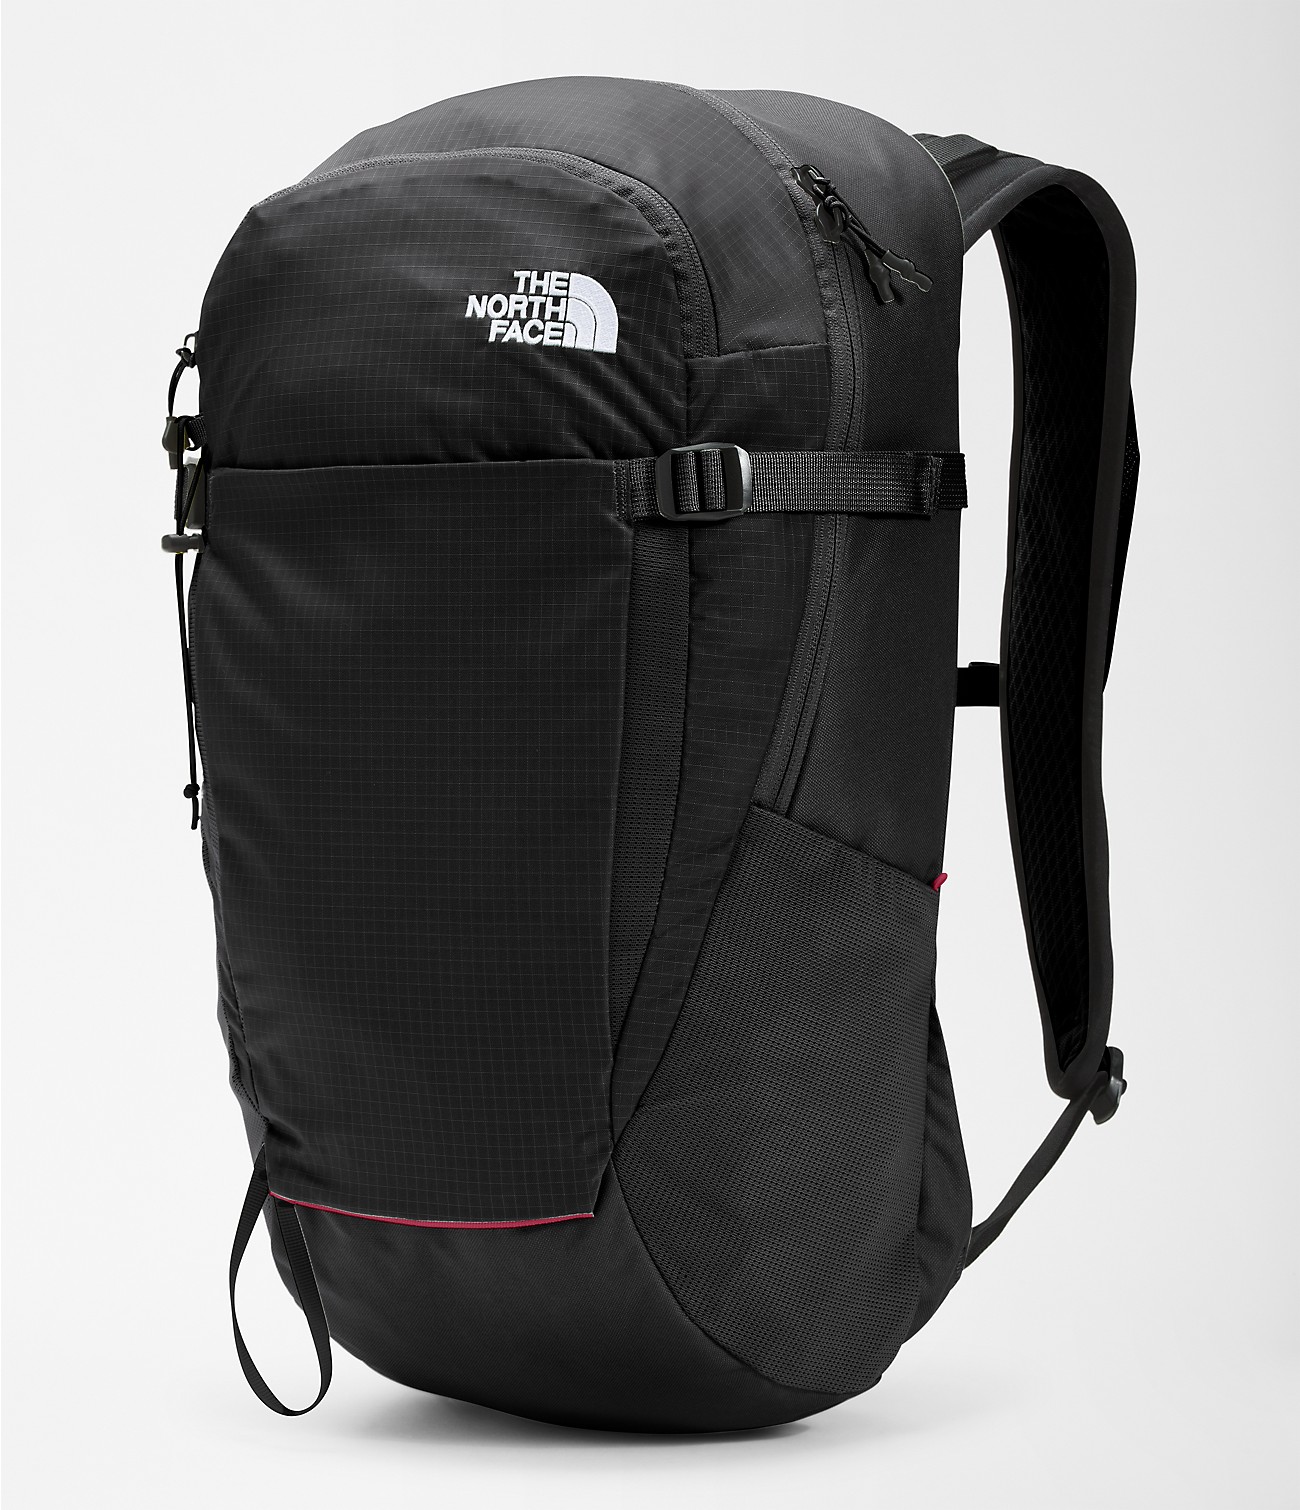 Unlock Wilderness' choice in the Thule Vs North Face comparison, the Basin 24 by The North Face